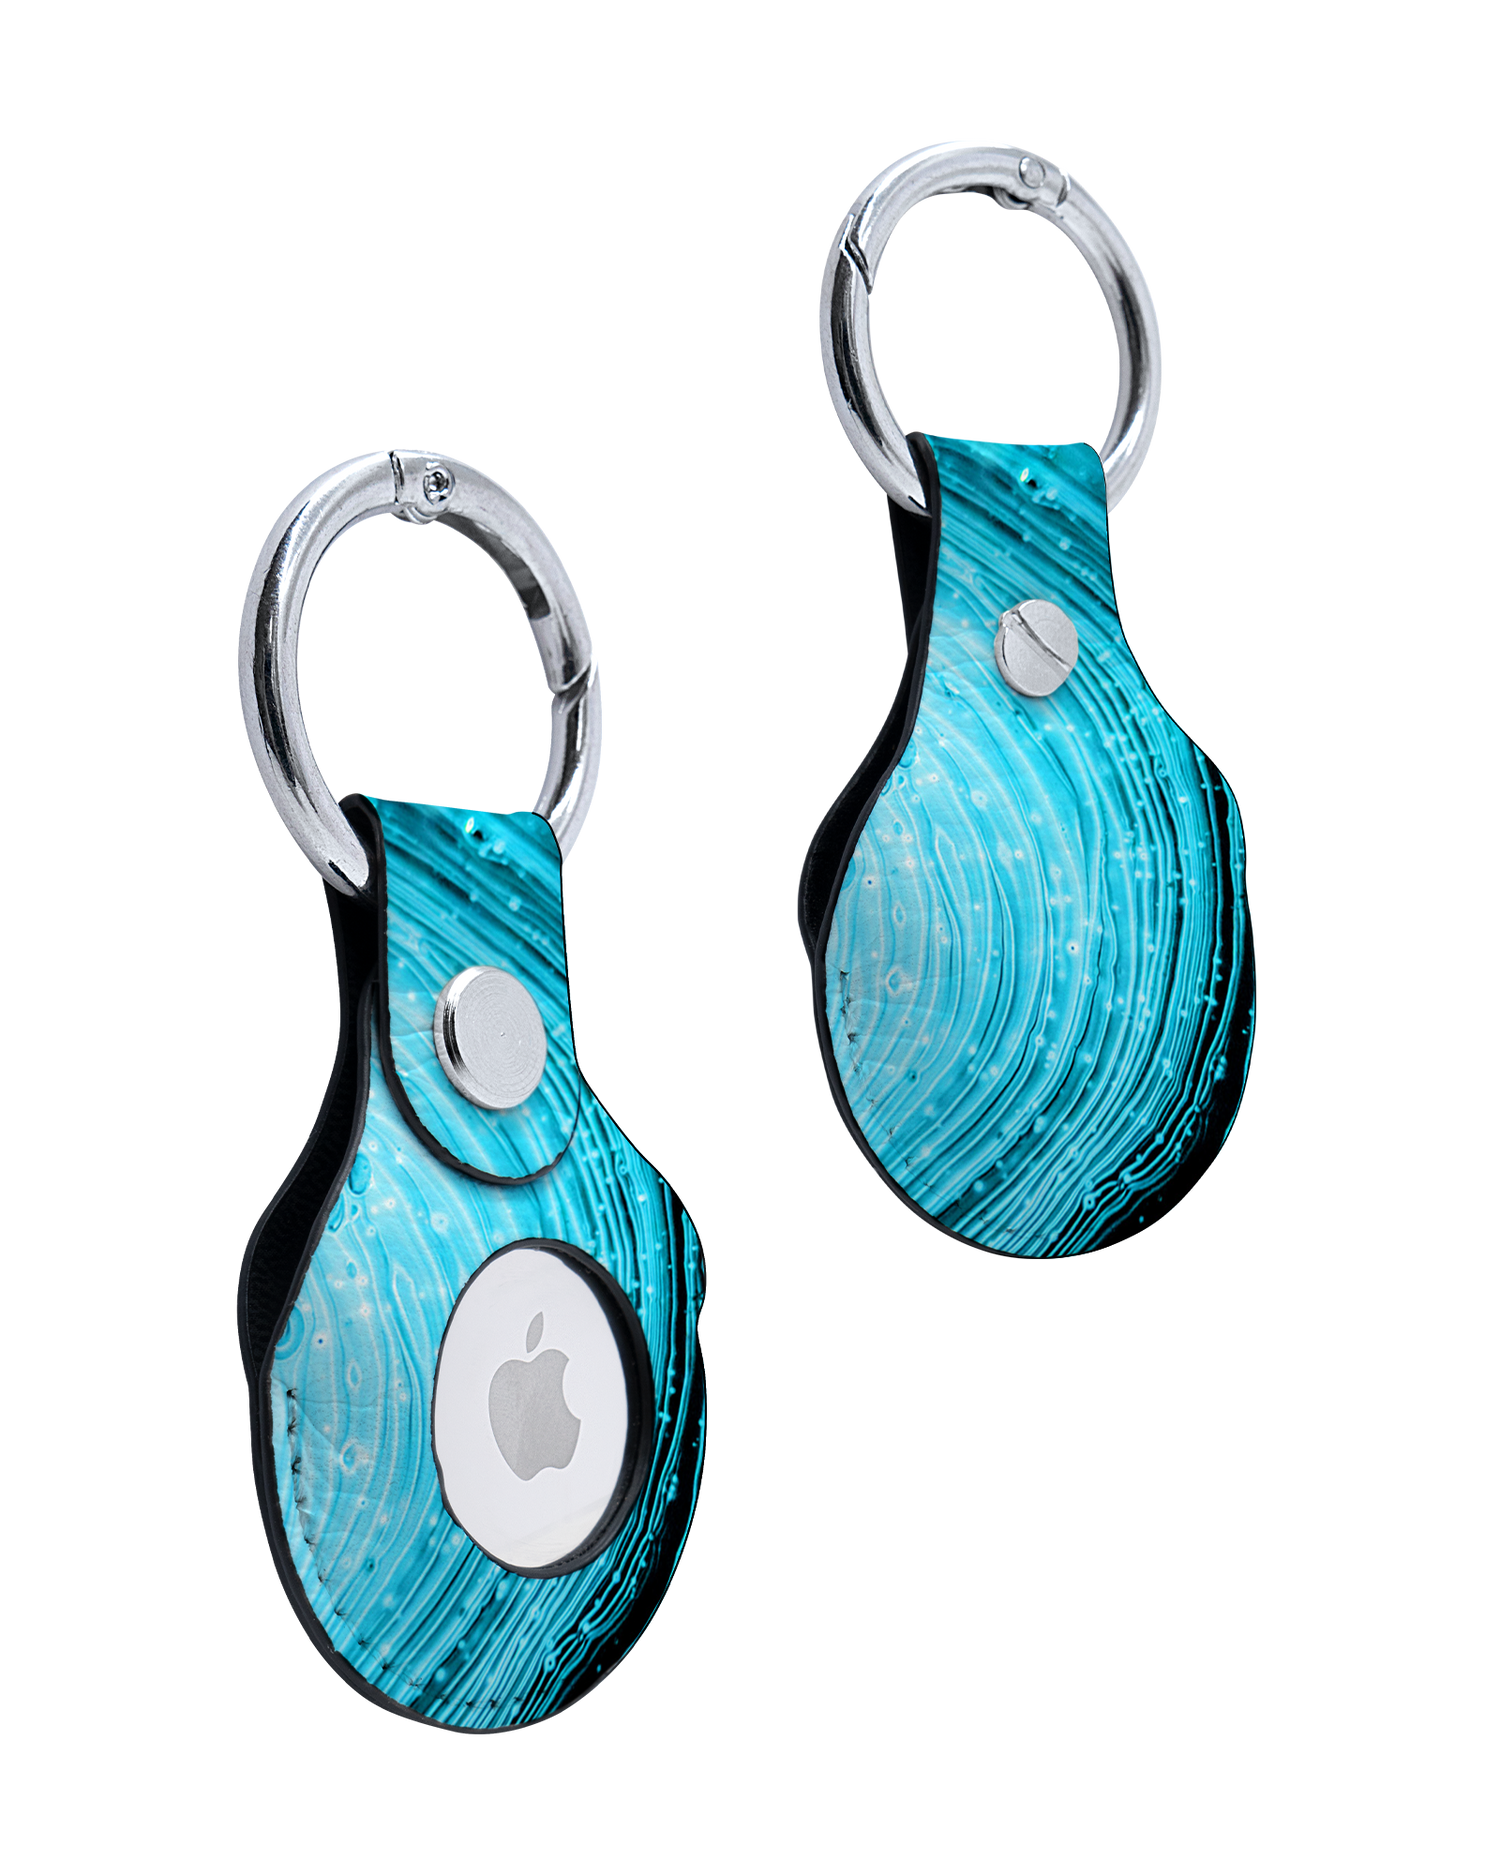 AirTag Holder with Turquoise Ripples Design: Front and Back